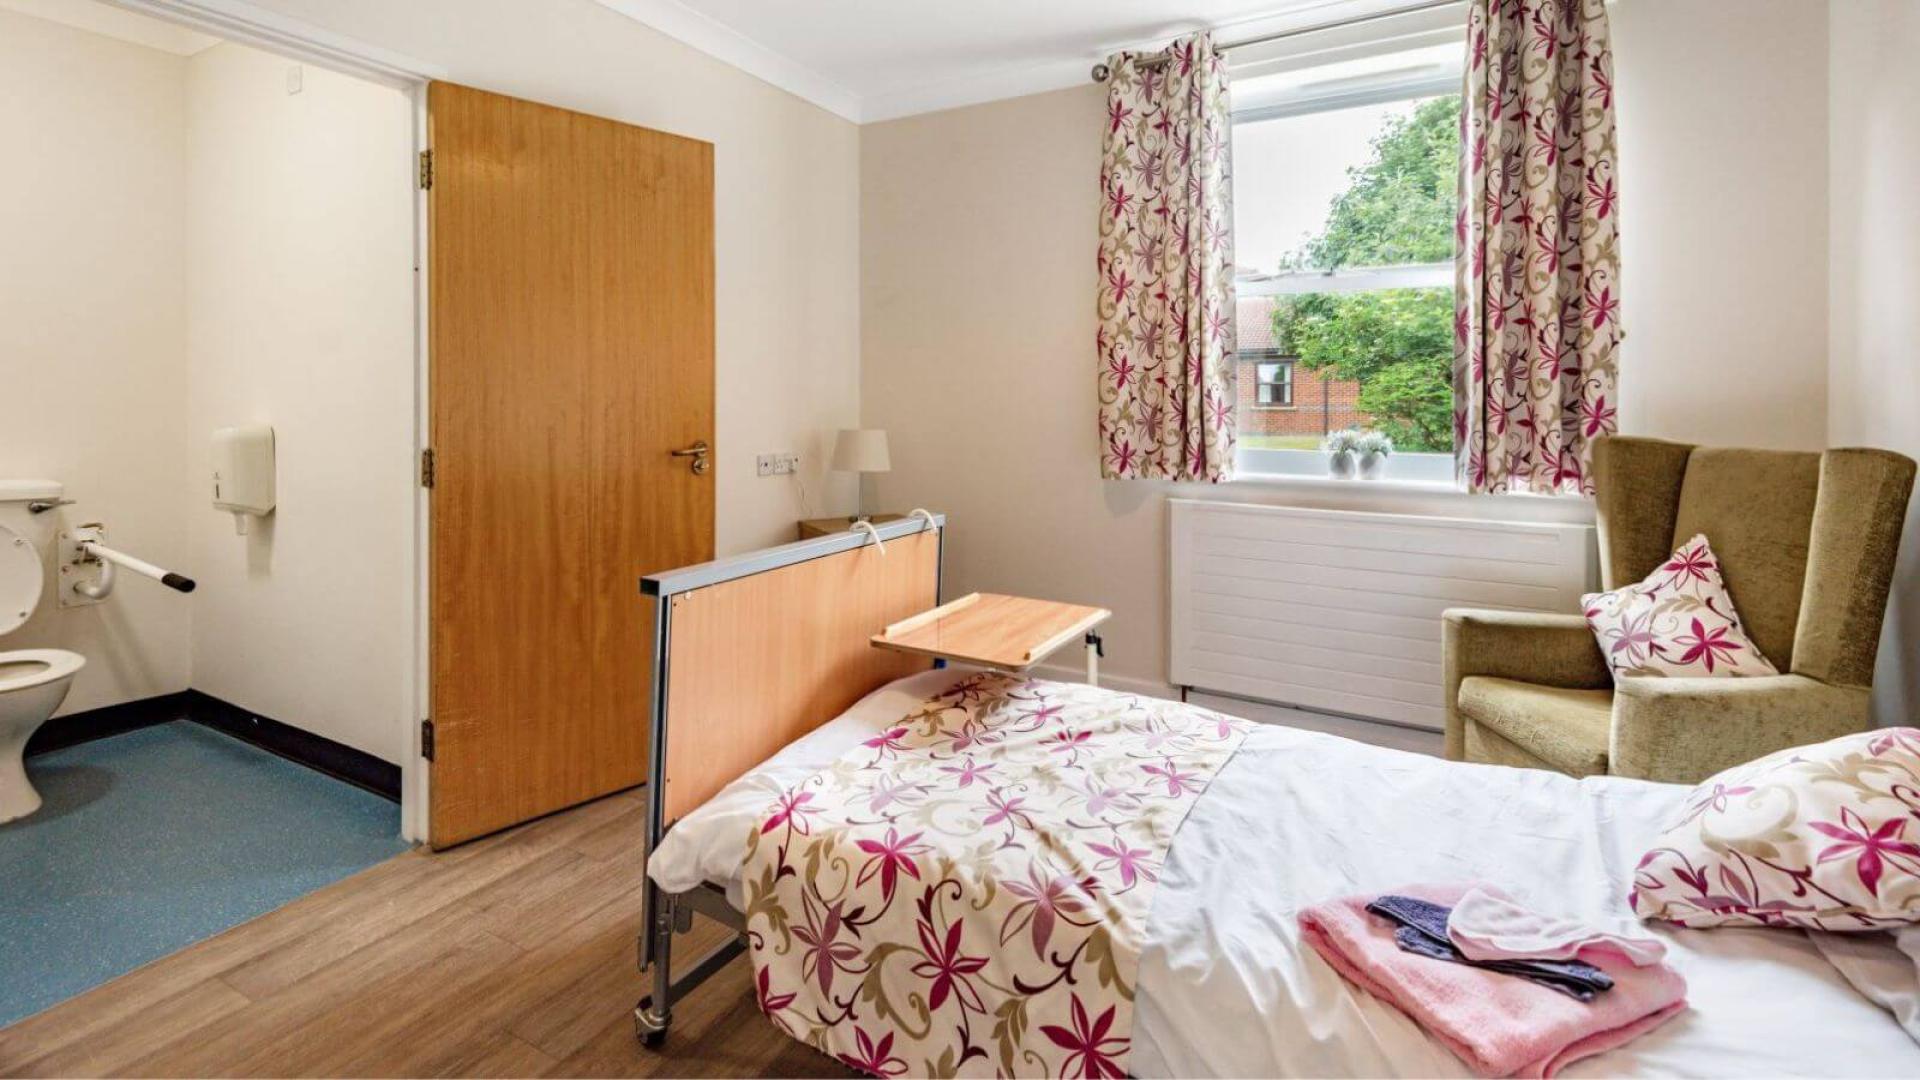 Bedroom at Lansbury Court Care Home in Sunderland